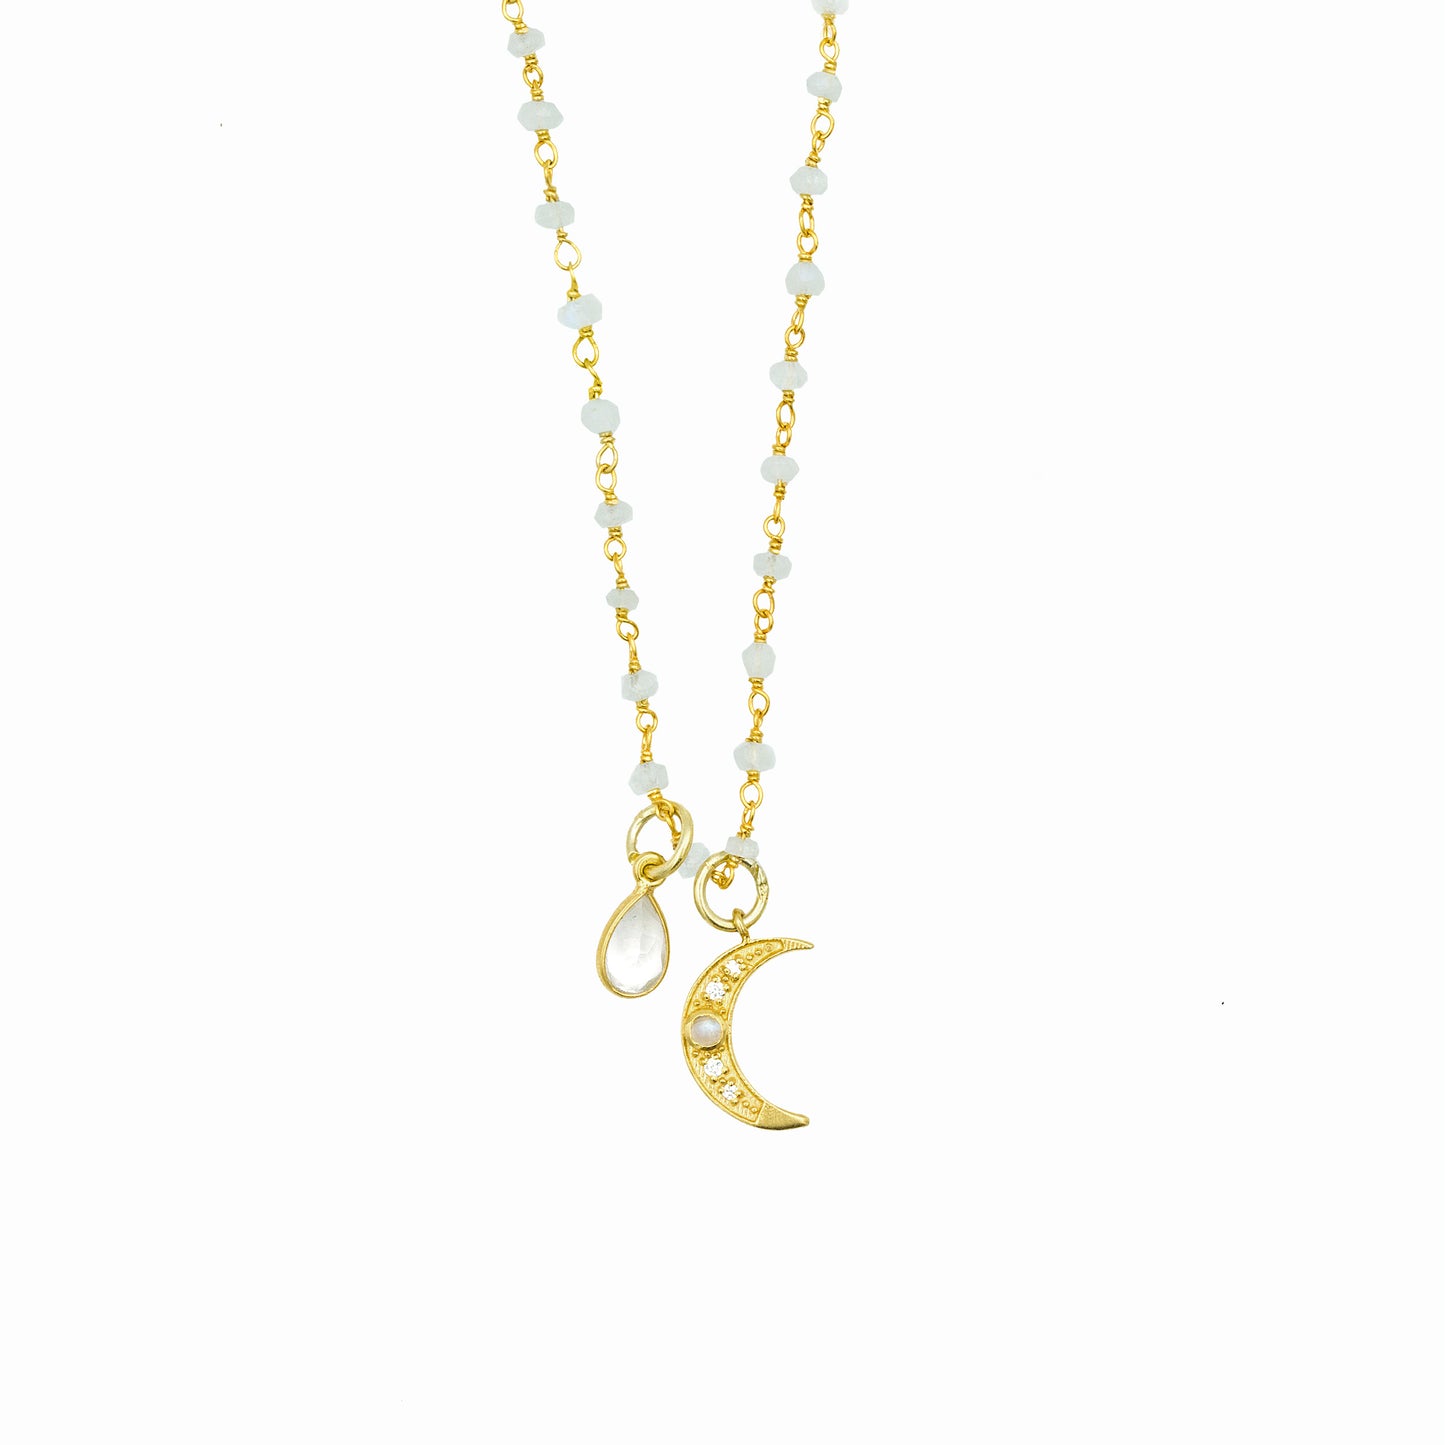 Moon Charm Gemstone Vermeil Necklace for Enlightenment